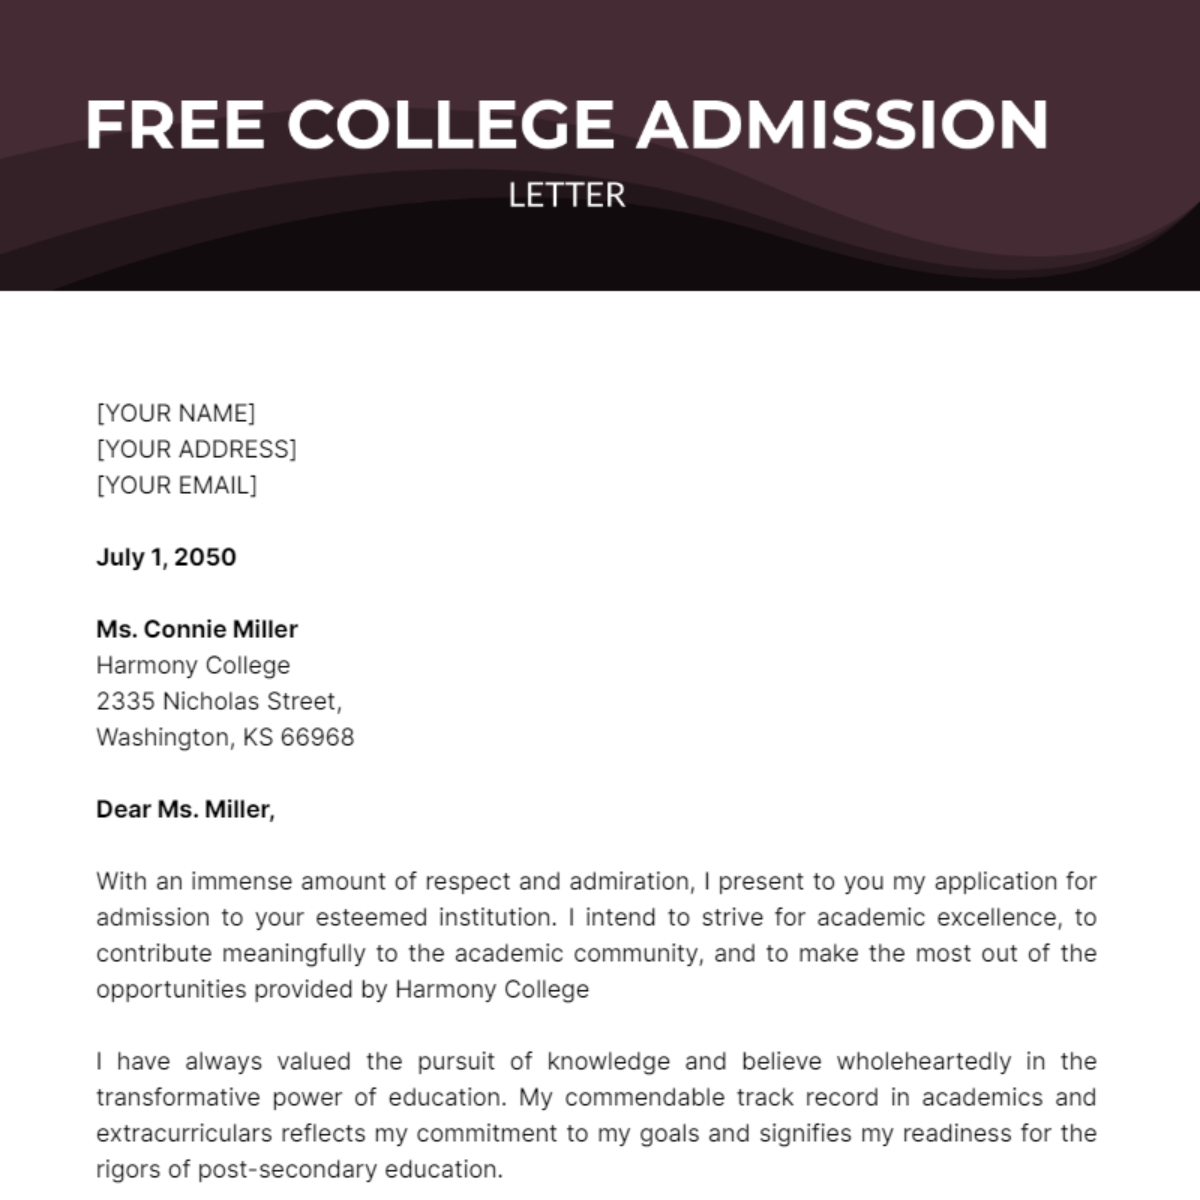 College Admission Letter Template